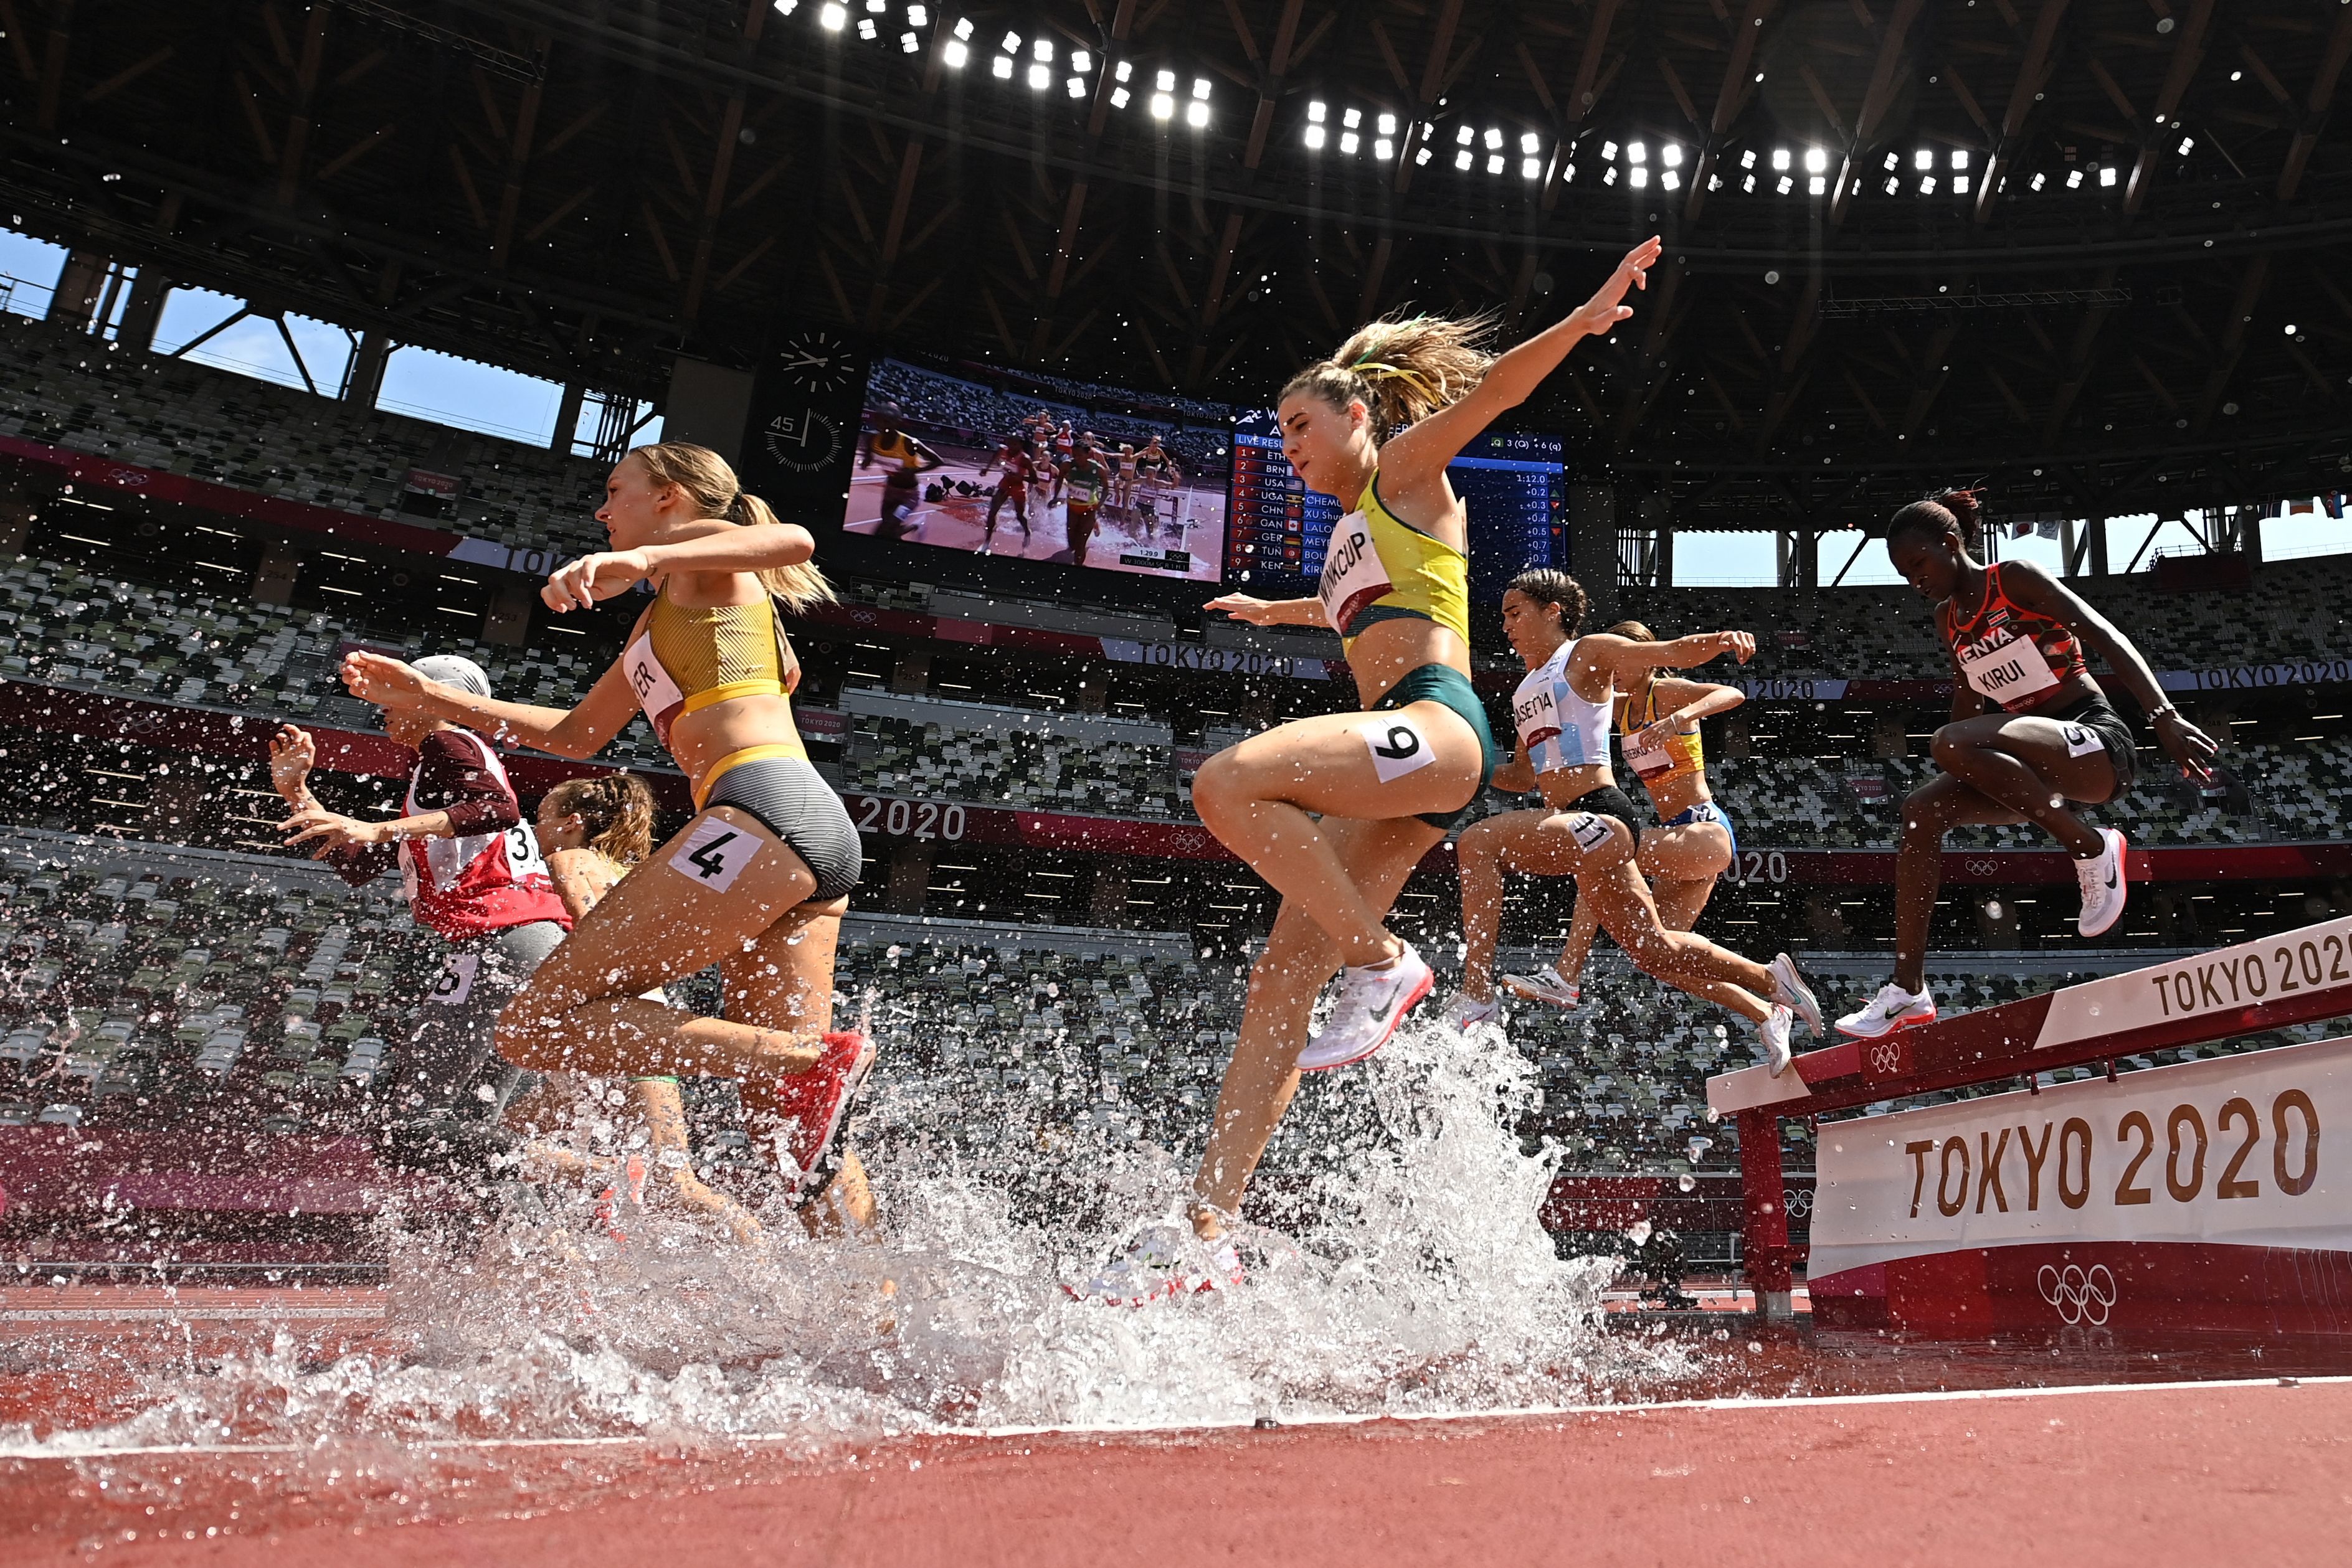 Australia's Georgia Winkcup (C) competes in the women's 3000m steeplechase heats during the Tokyo 2020 Olympic Games at the Olympic Stadium in Tokyo on August 1